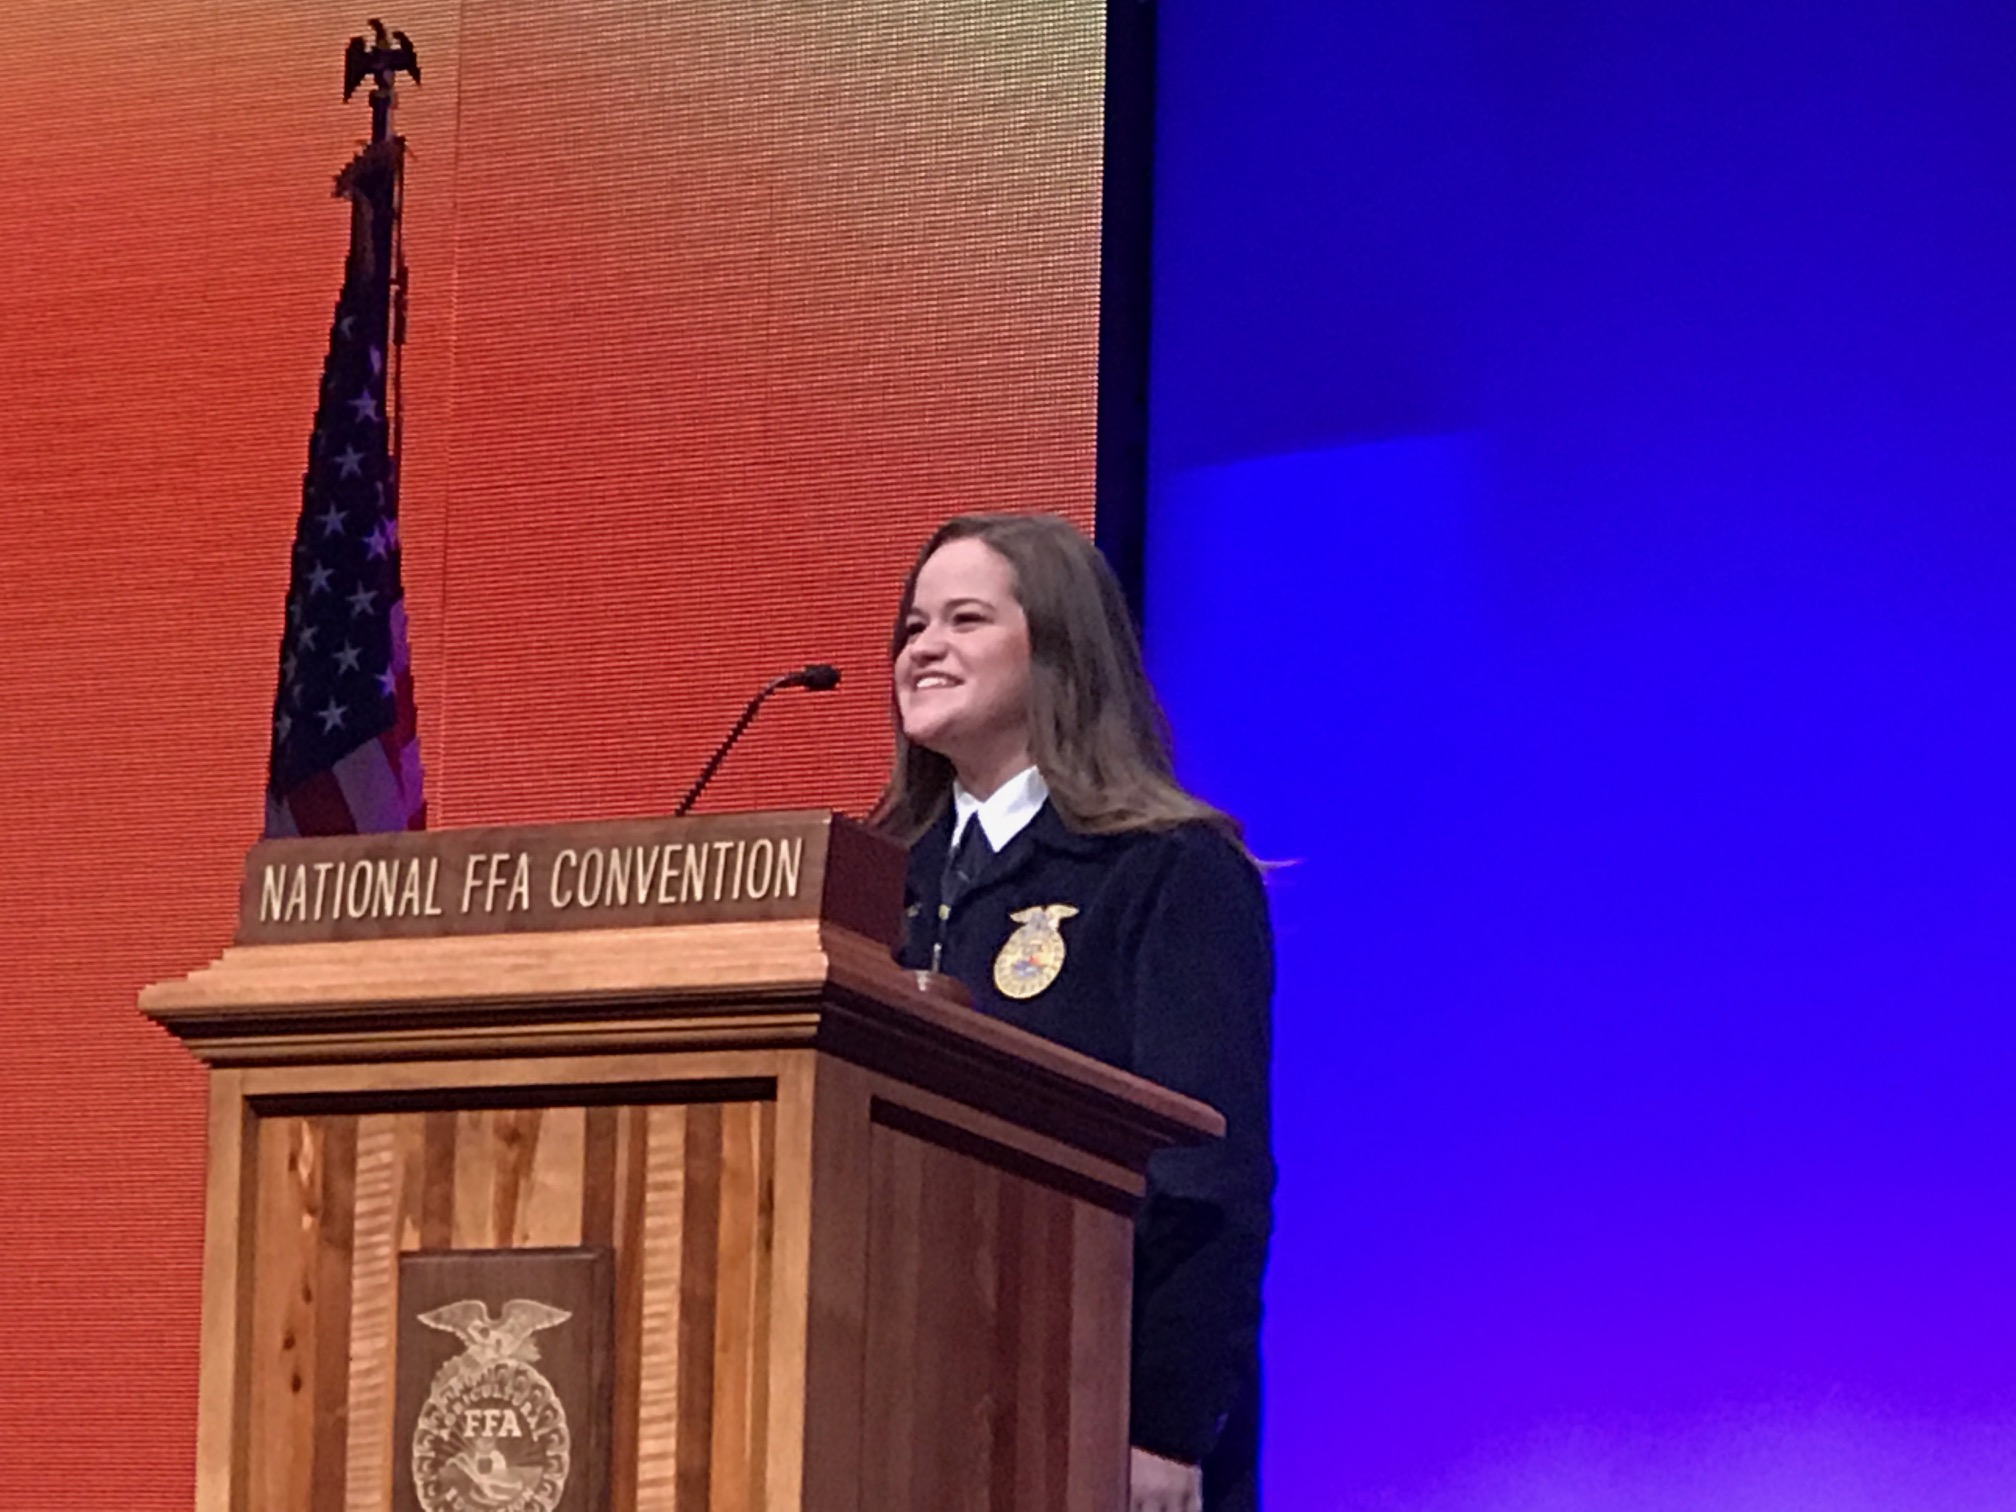 Piper Merritt Elected as Central Region Vice President as Part of the 2017-18 National FFA Officer Team